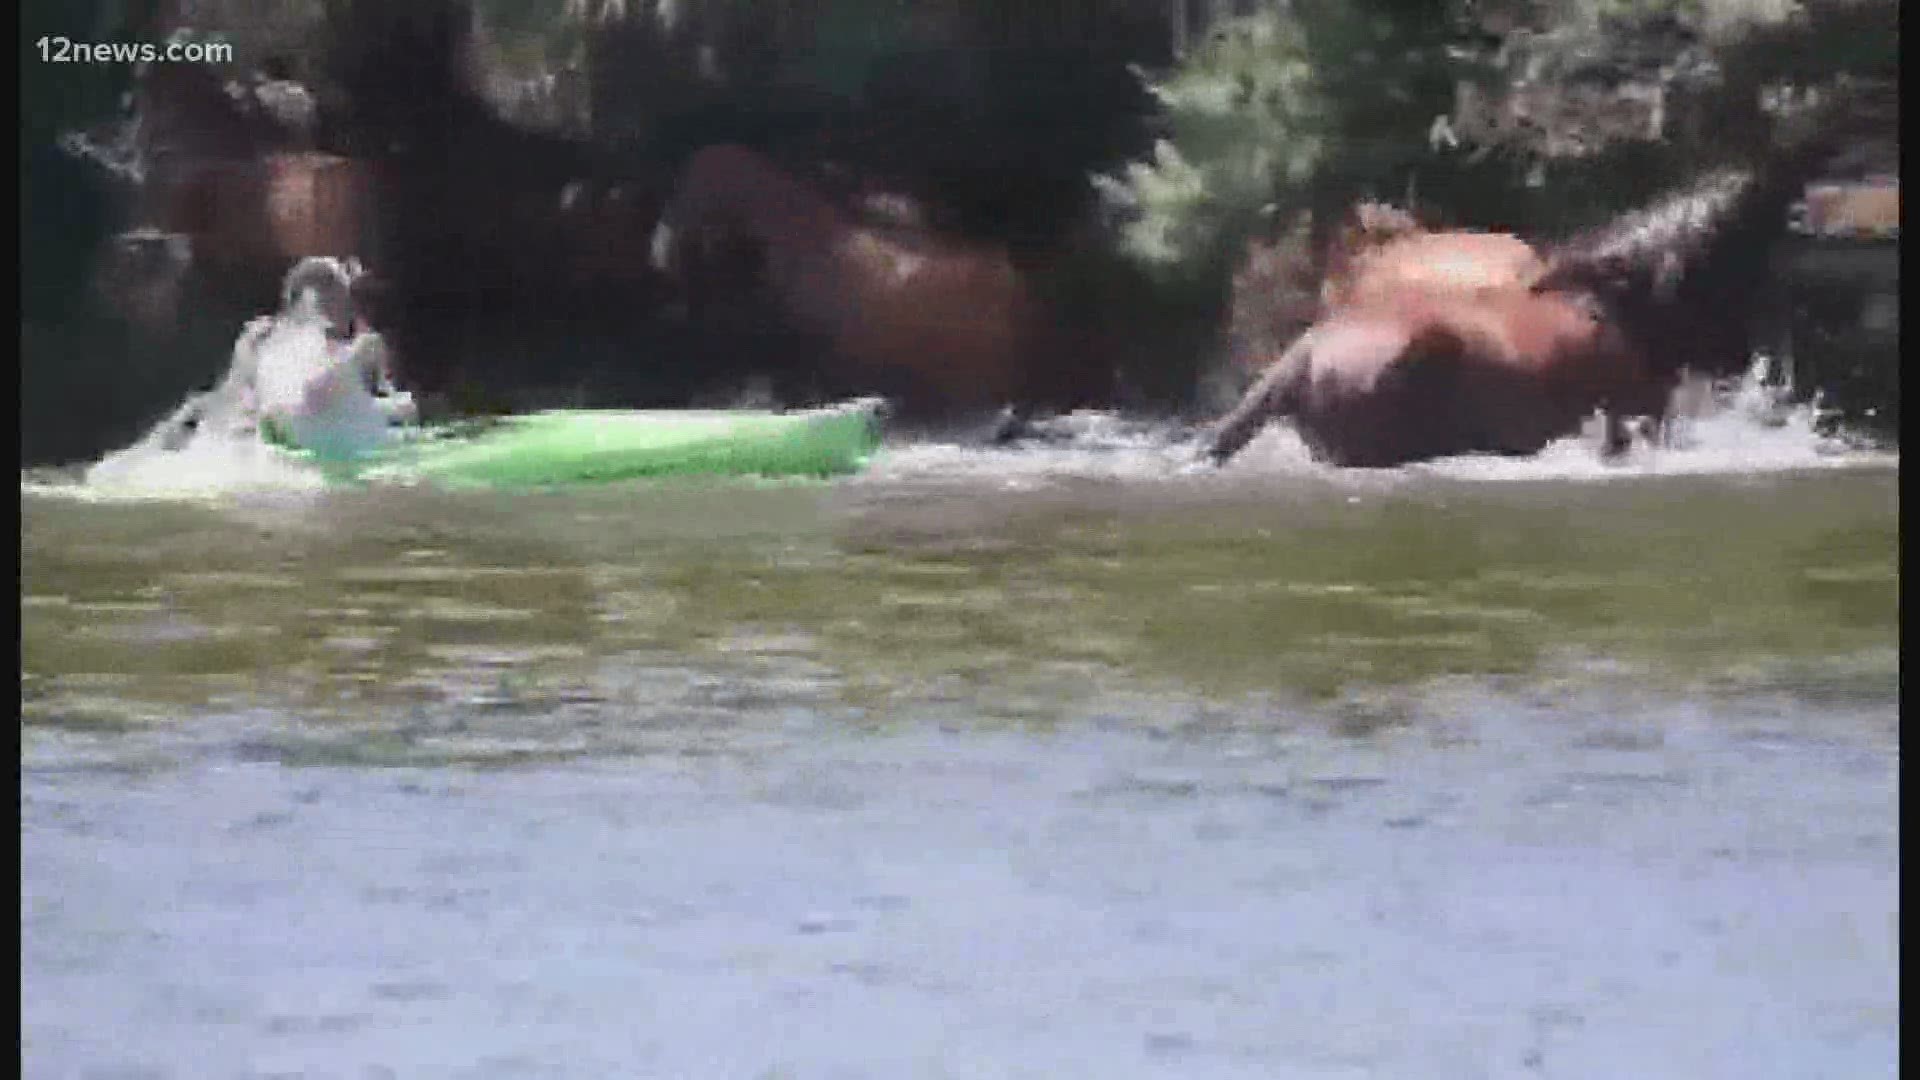 A kayaker has been caught on video chasing a group of wild horses out of the Salt River for no apparent reason. An advocacy group says it was cruel and dangerous.